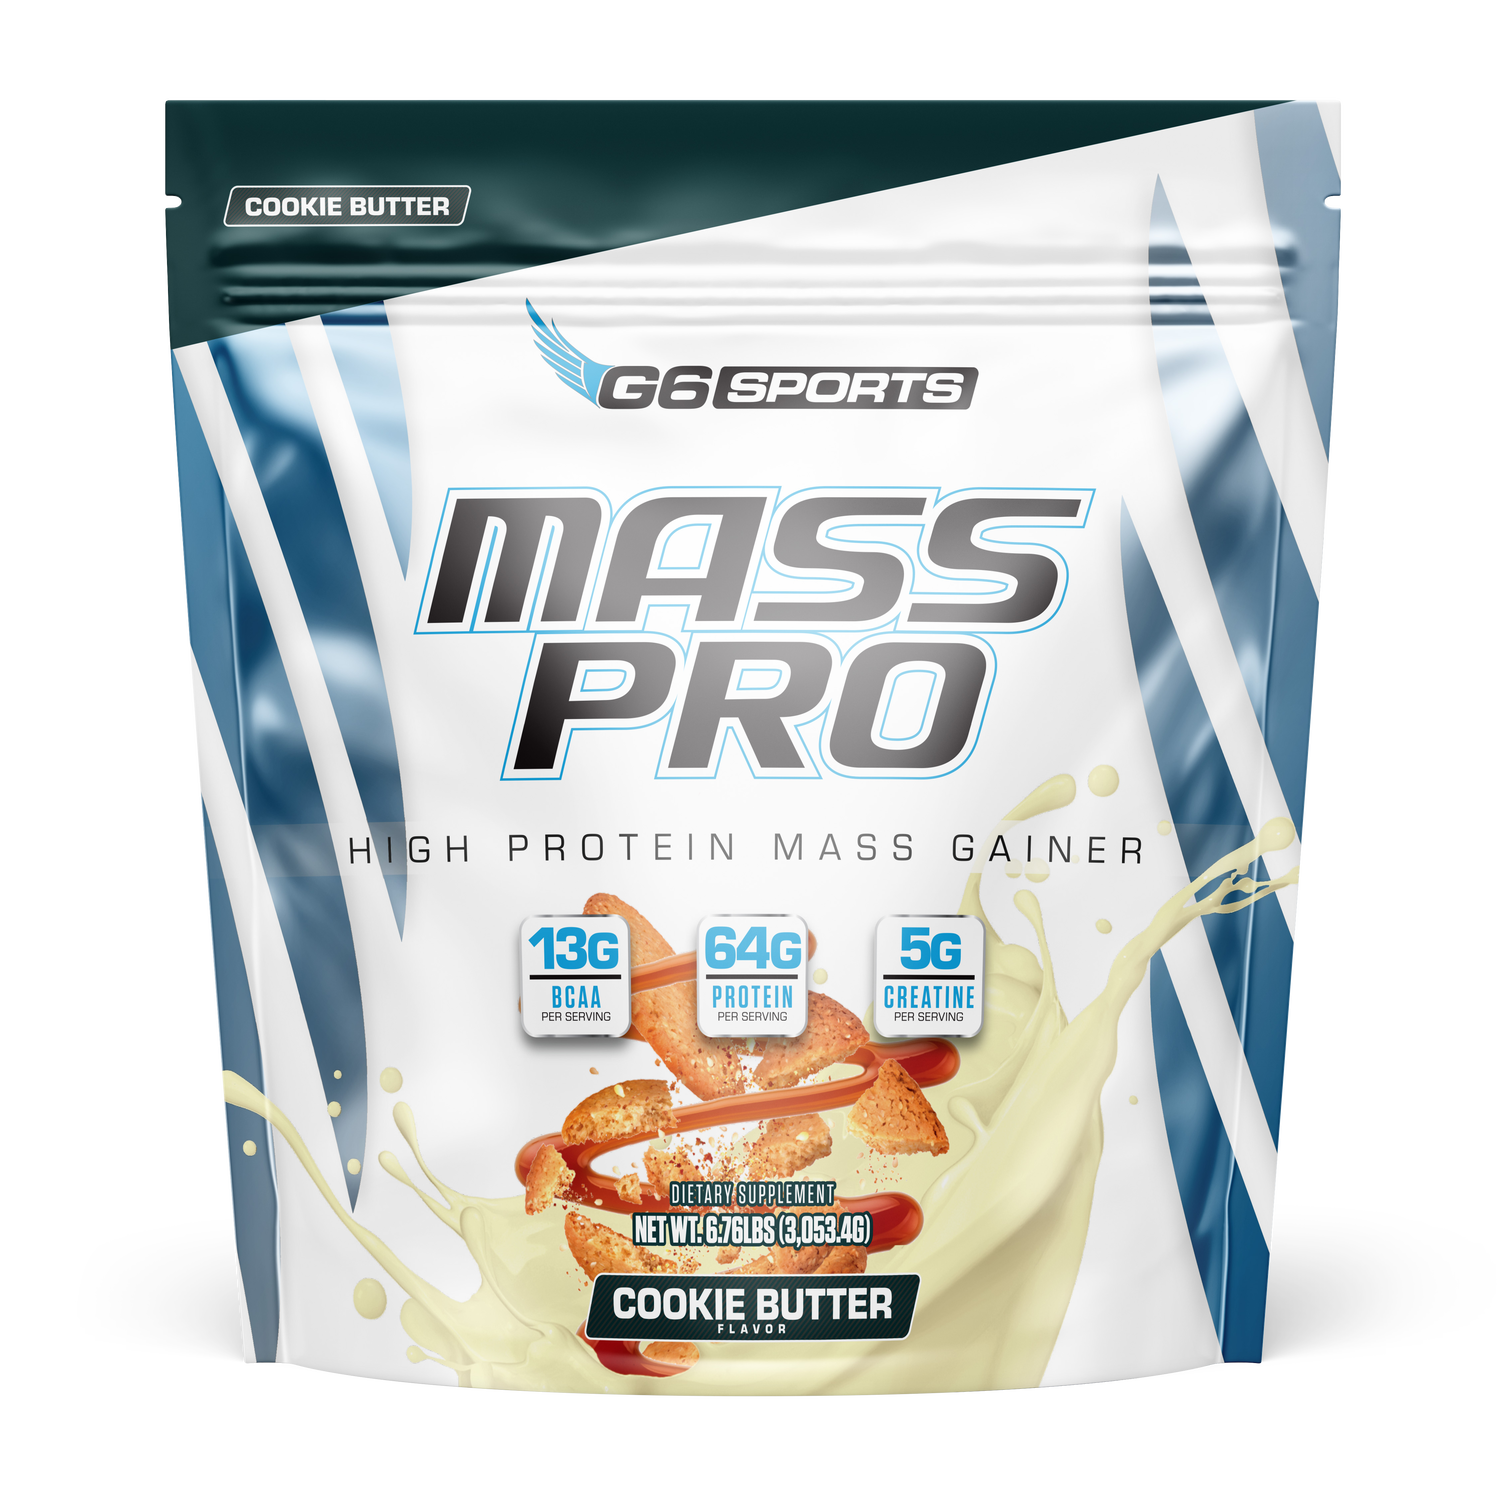 G6 Sports Mass Pro High Protein Mass Gainer Healthy - Cookie Butter (14 Servings)